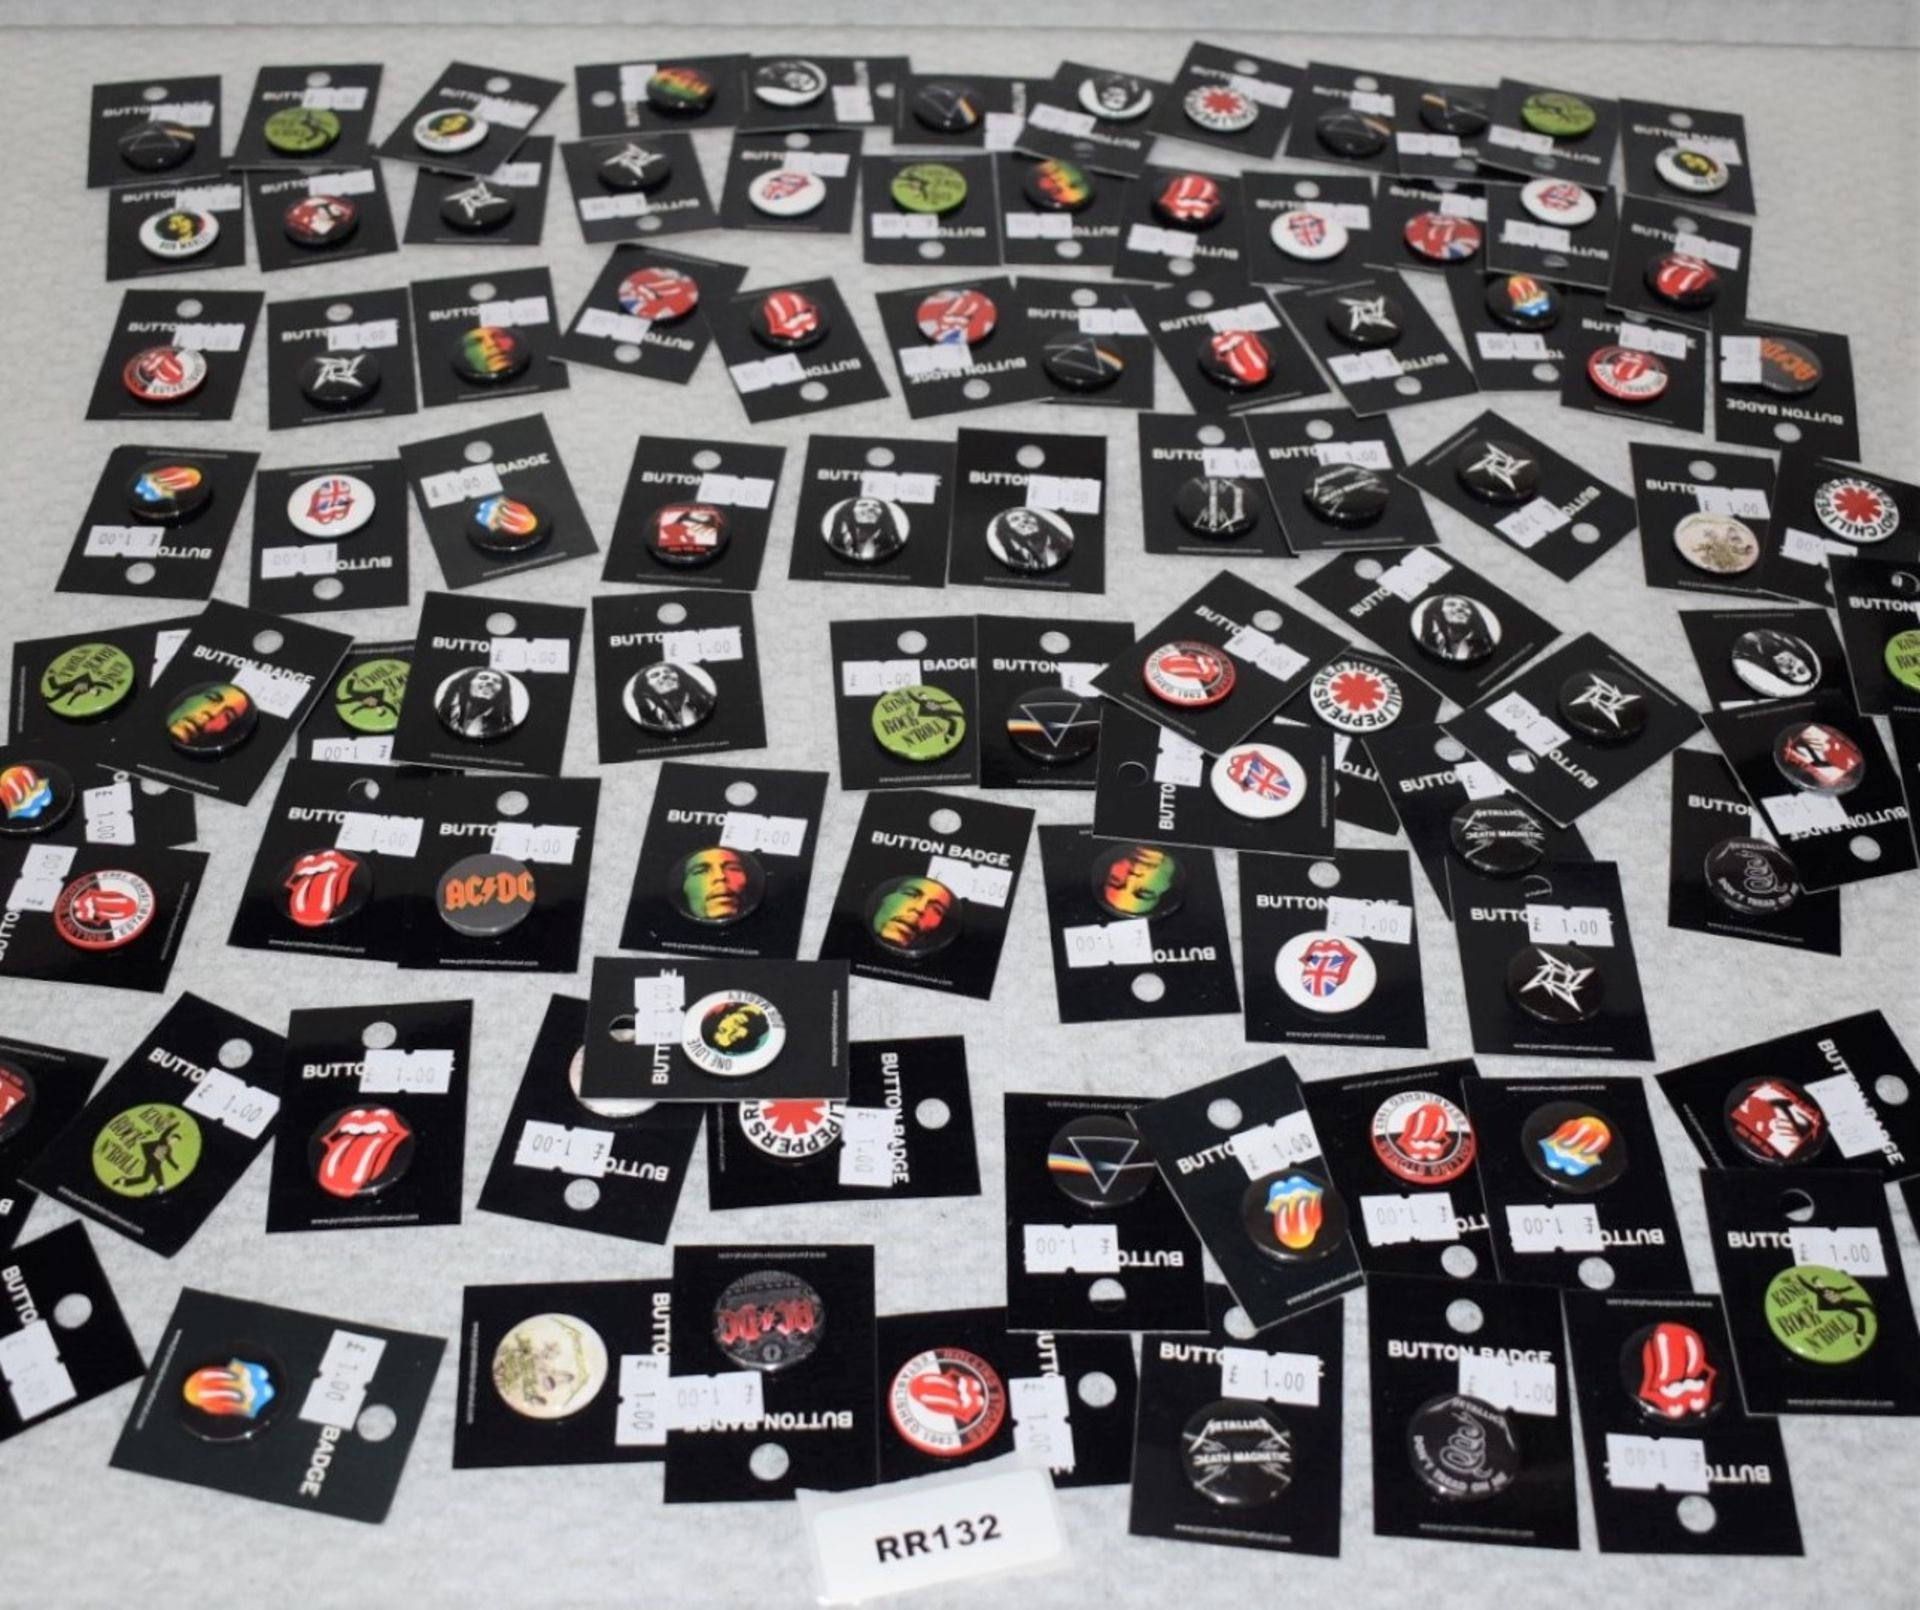 100 x Rock n Roll Button Badges By Pyramid - Various Bands - Licensed Merchandise - RRP £100 - Image 2 of 6